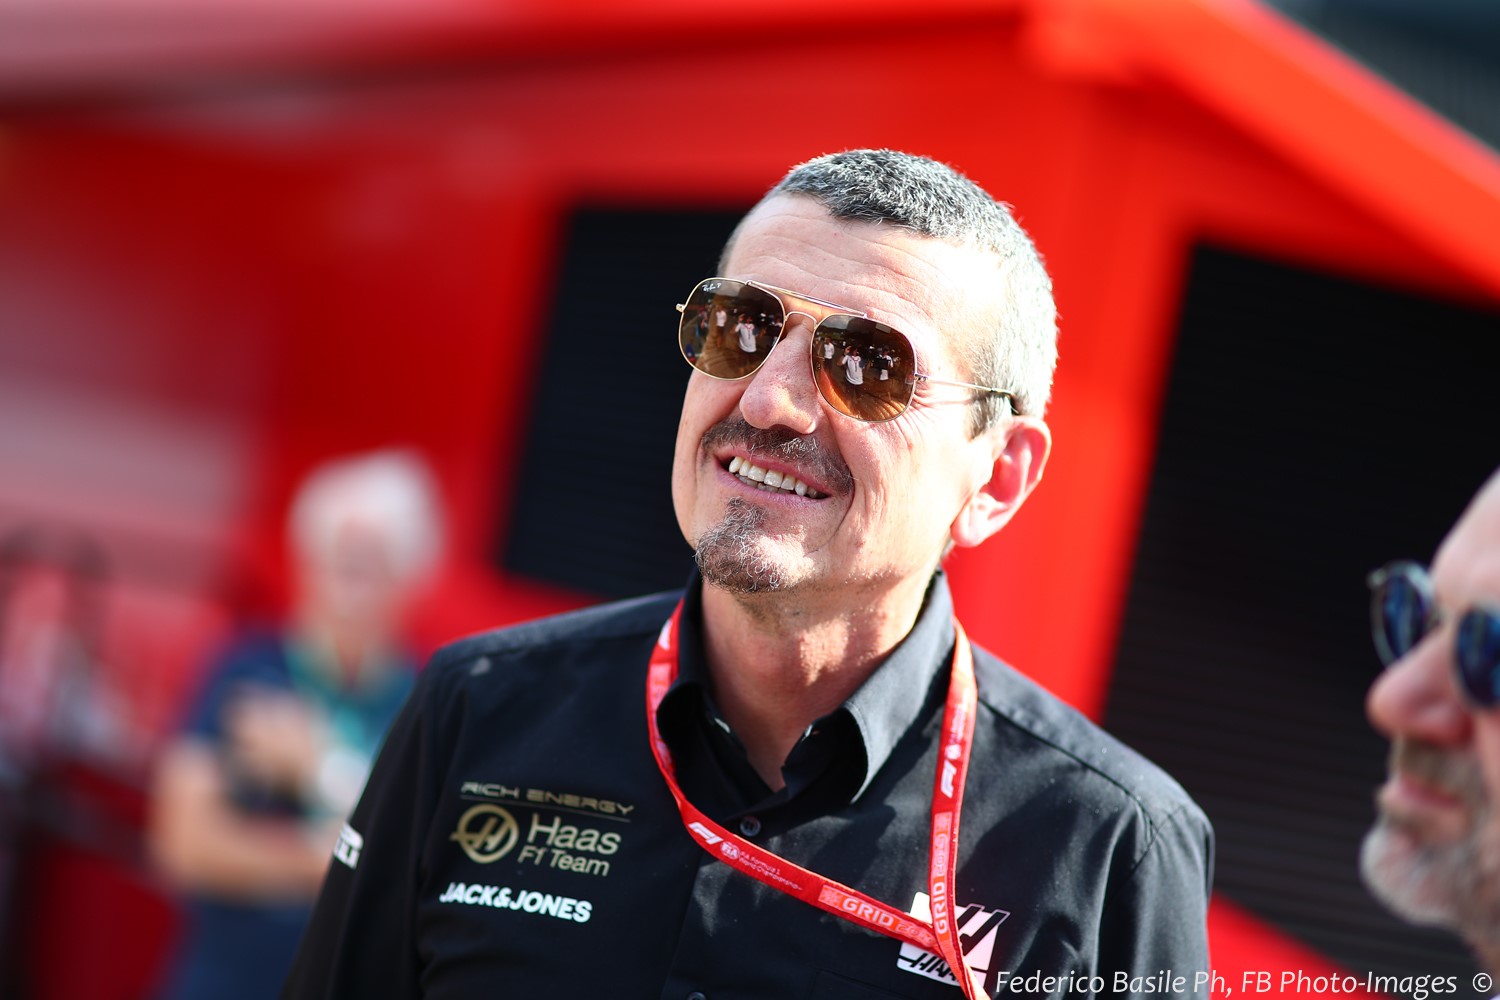 Gunther Steiner is still salivating over the prospects of getting Kubica's sponsor check for Kubica to play video games on the Haas Dallara simulator